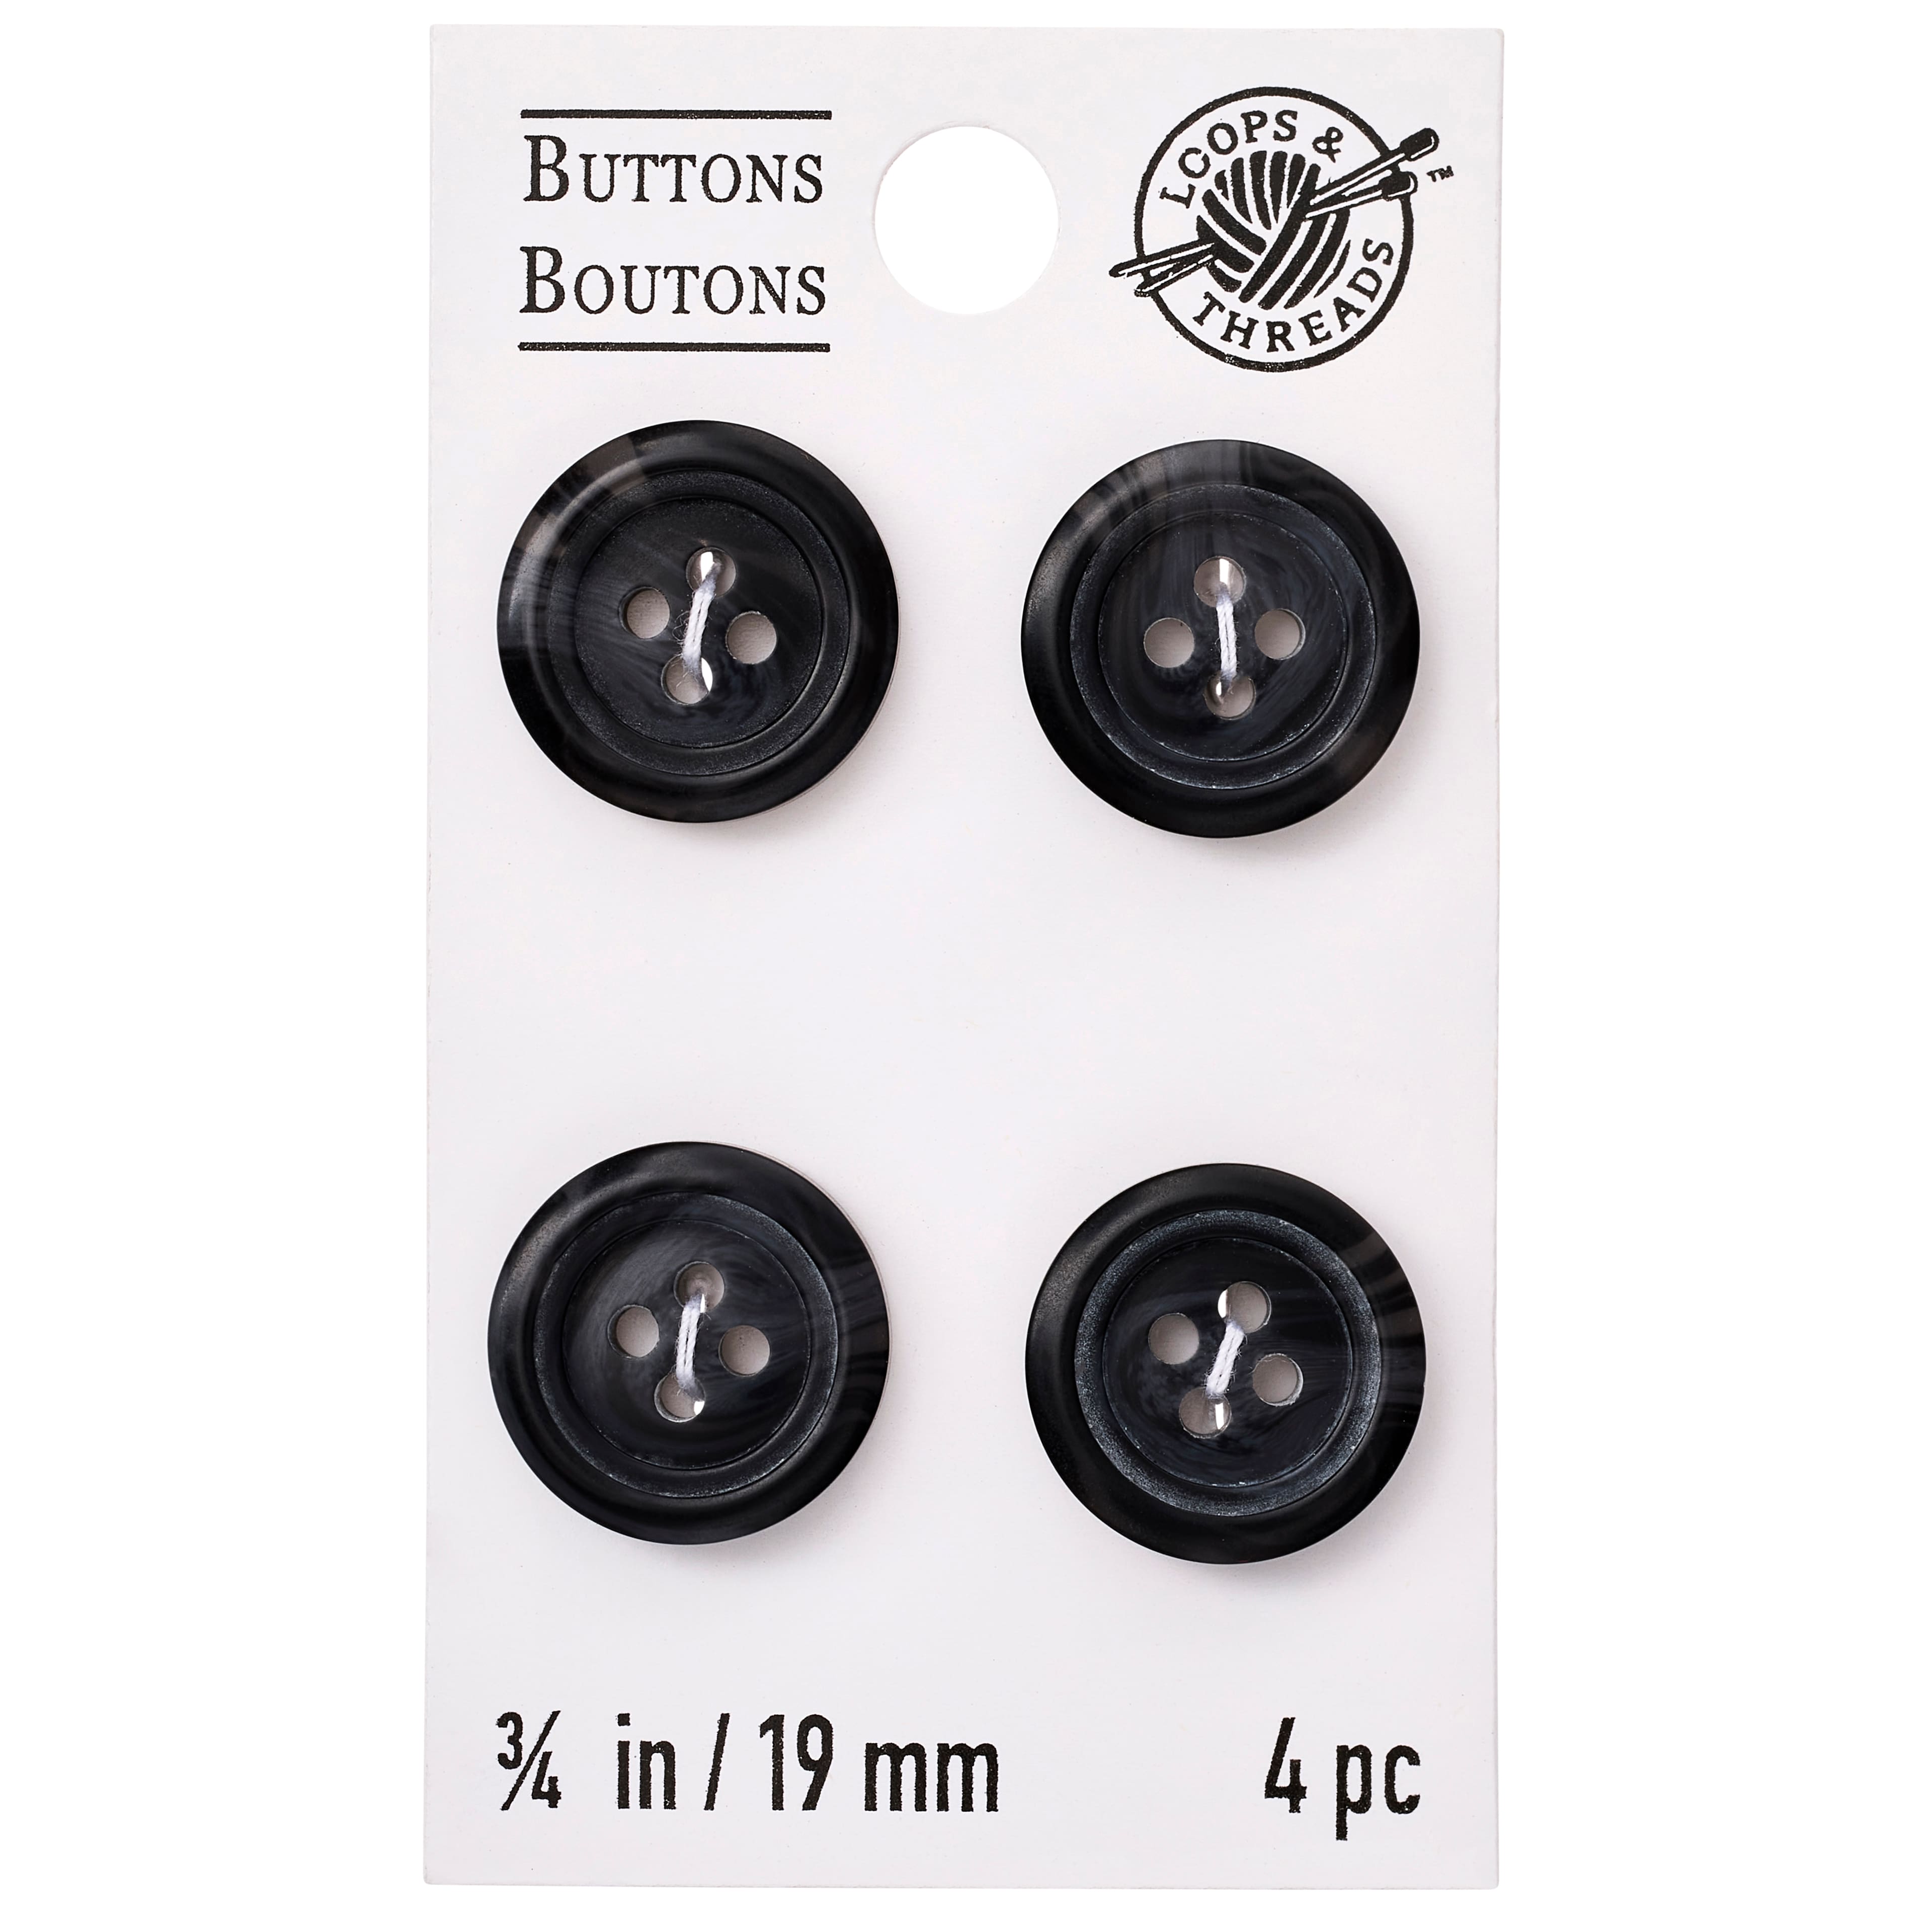 Blumenthal Lansing Silver Buttons, 2 Pack